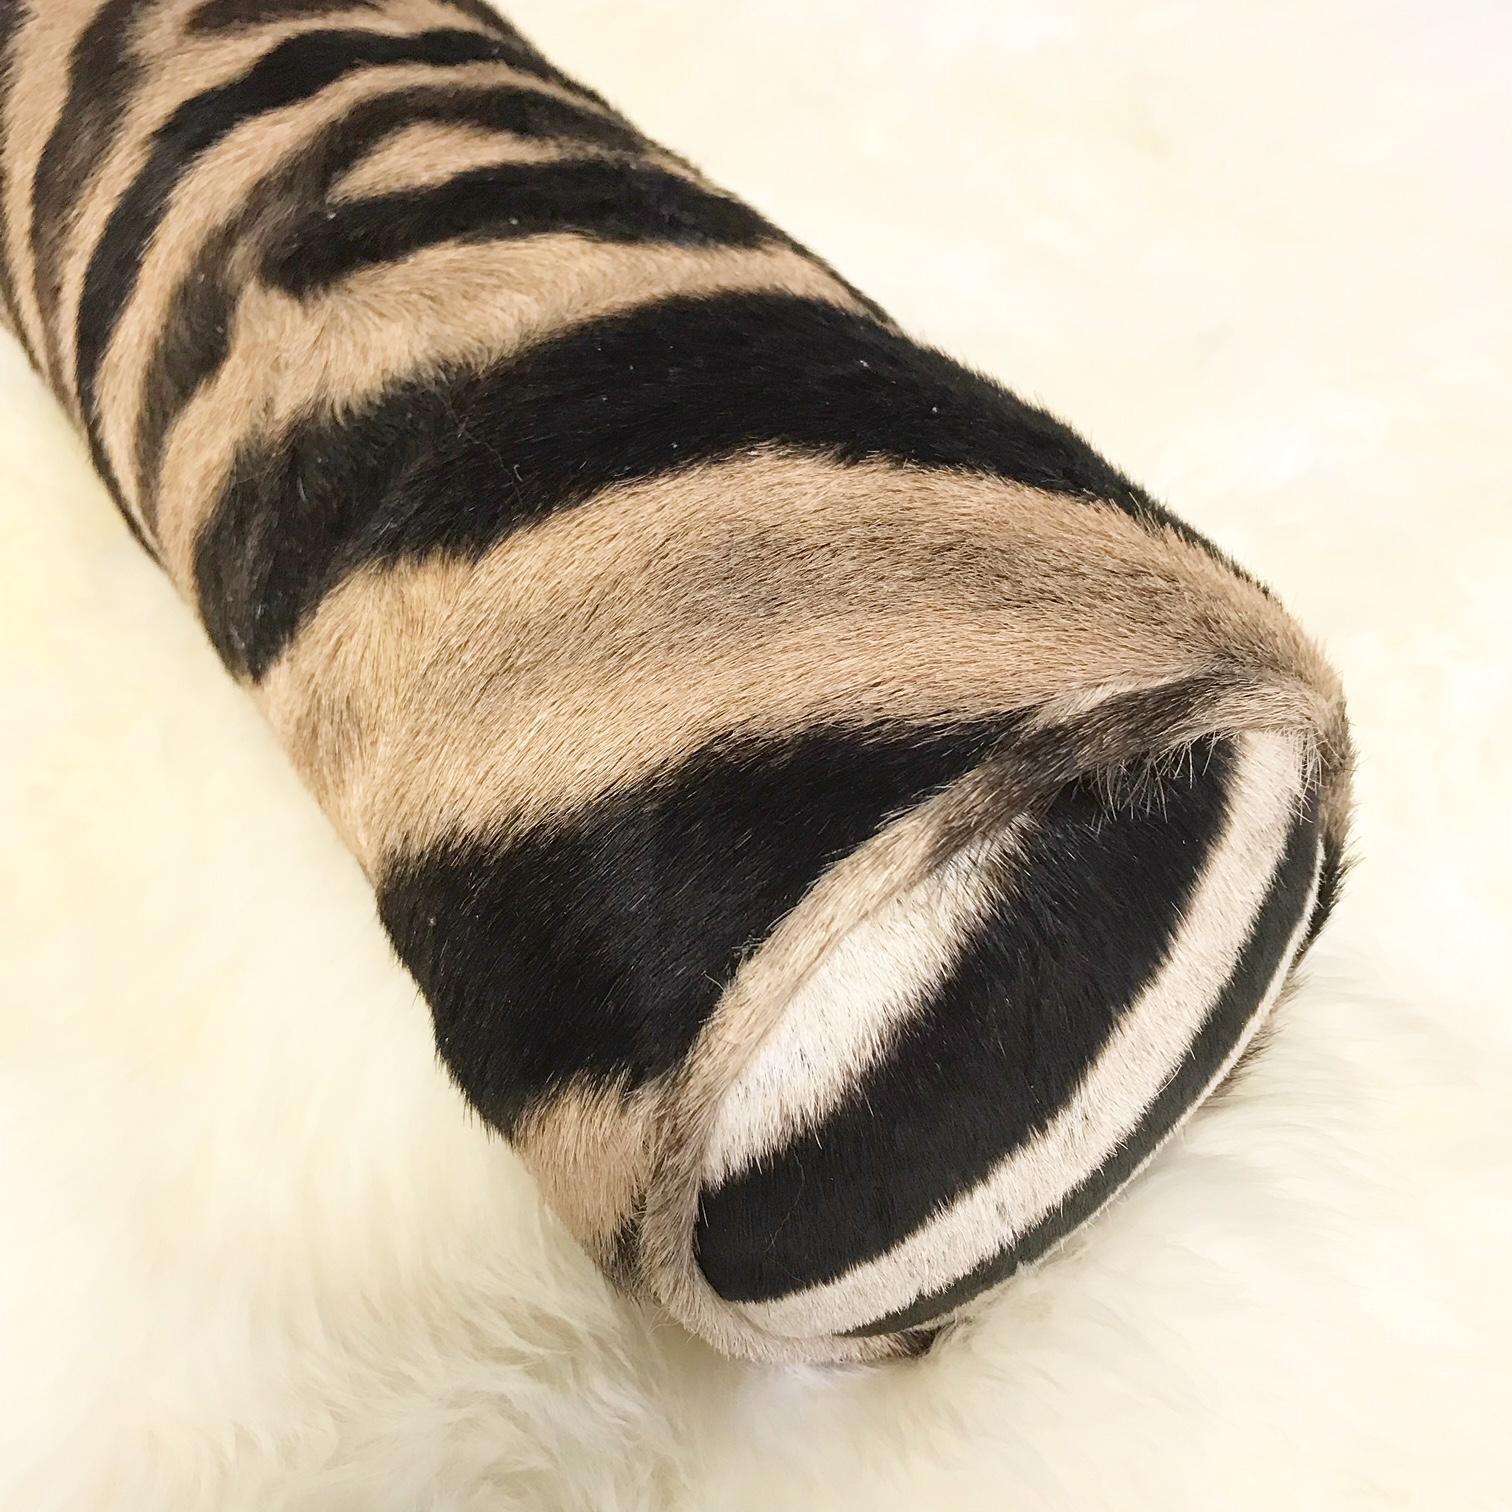 Forsyth zebra hide pillows are simply the best. The most beautiful hides are selected, hand-cut, hand stitched, and hand-stuffed with the finest goose down. Each step is meticulously curated by Saint Louis based Forsyth artisans. Every pillow is a